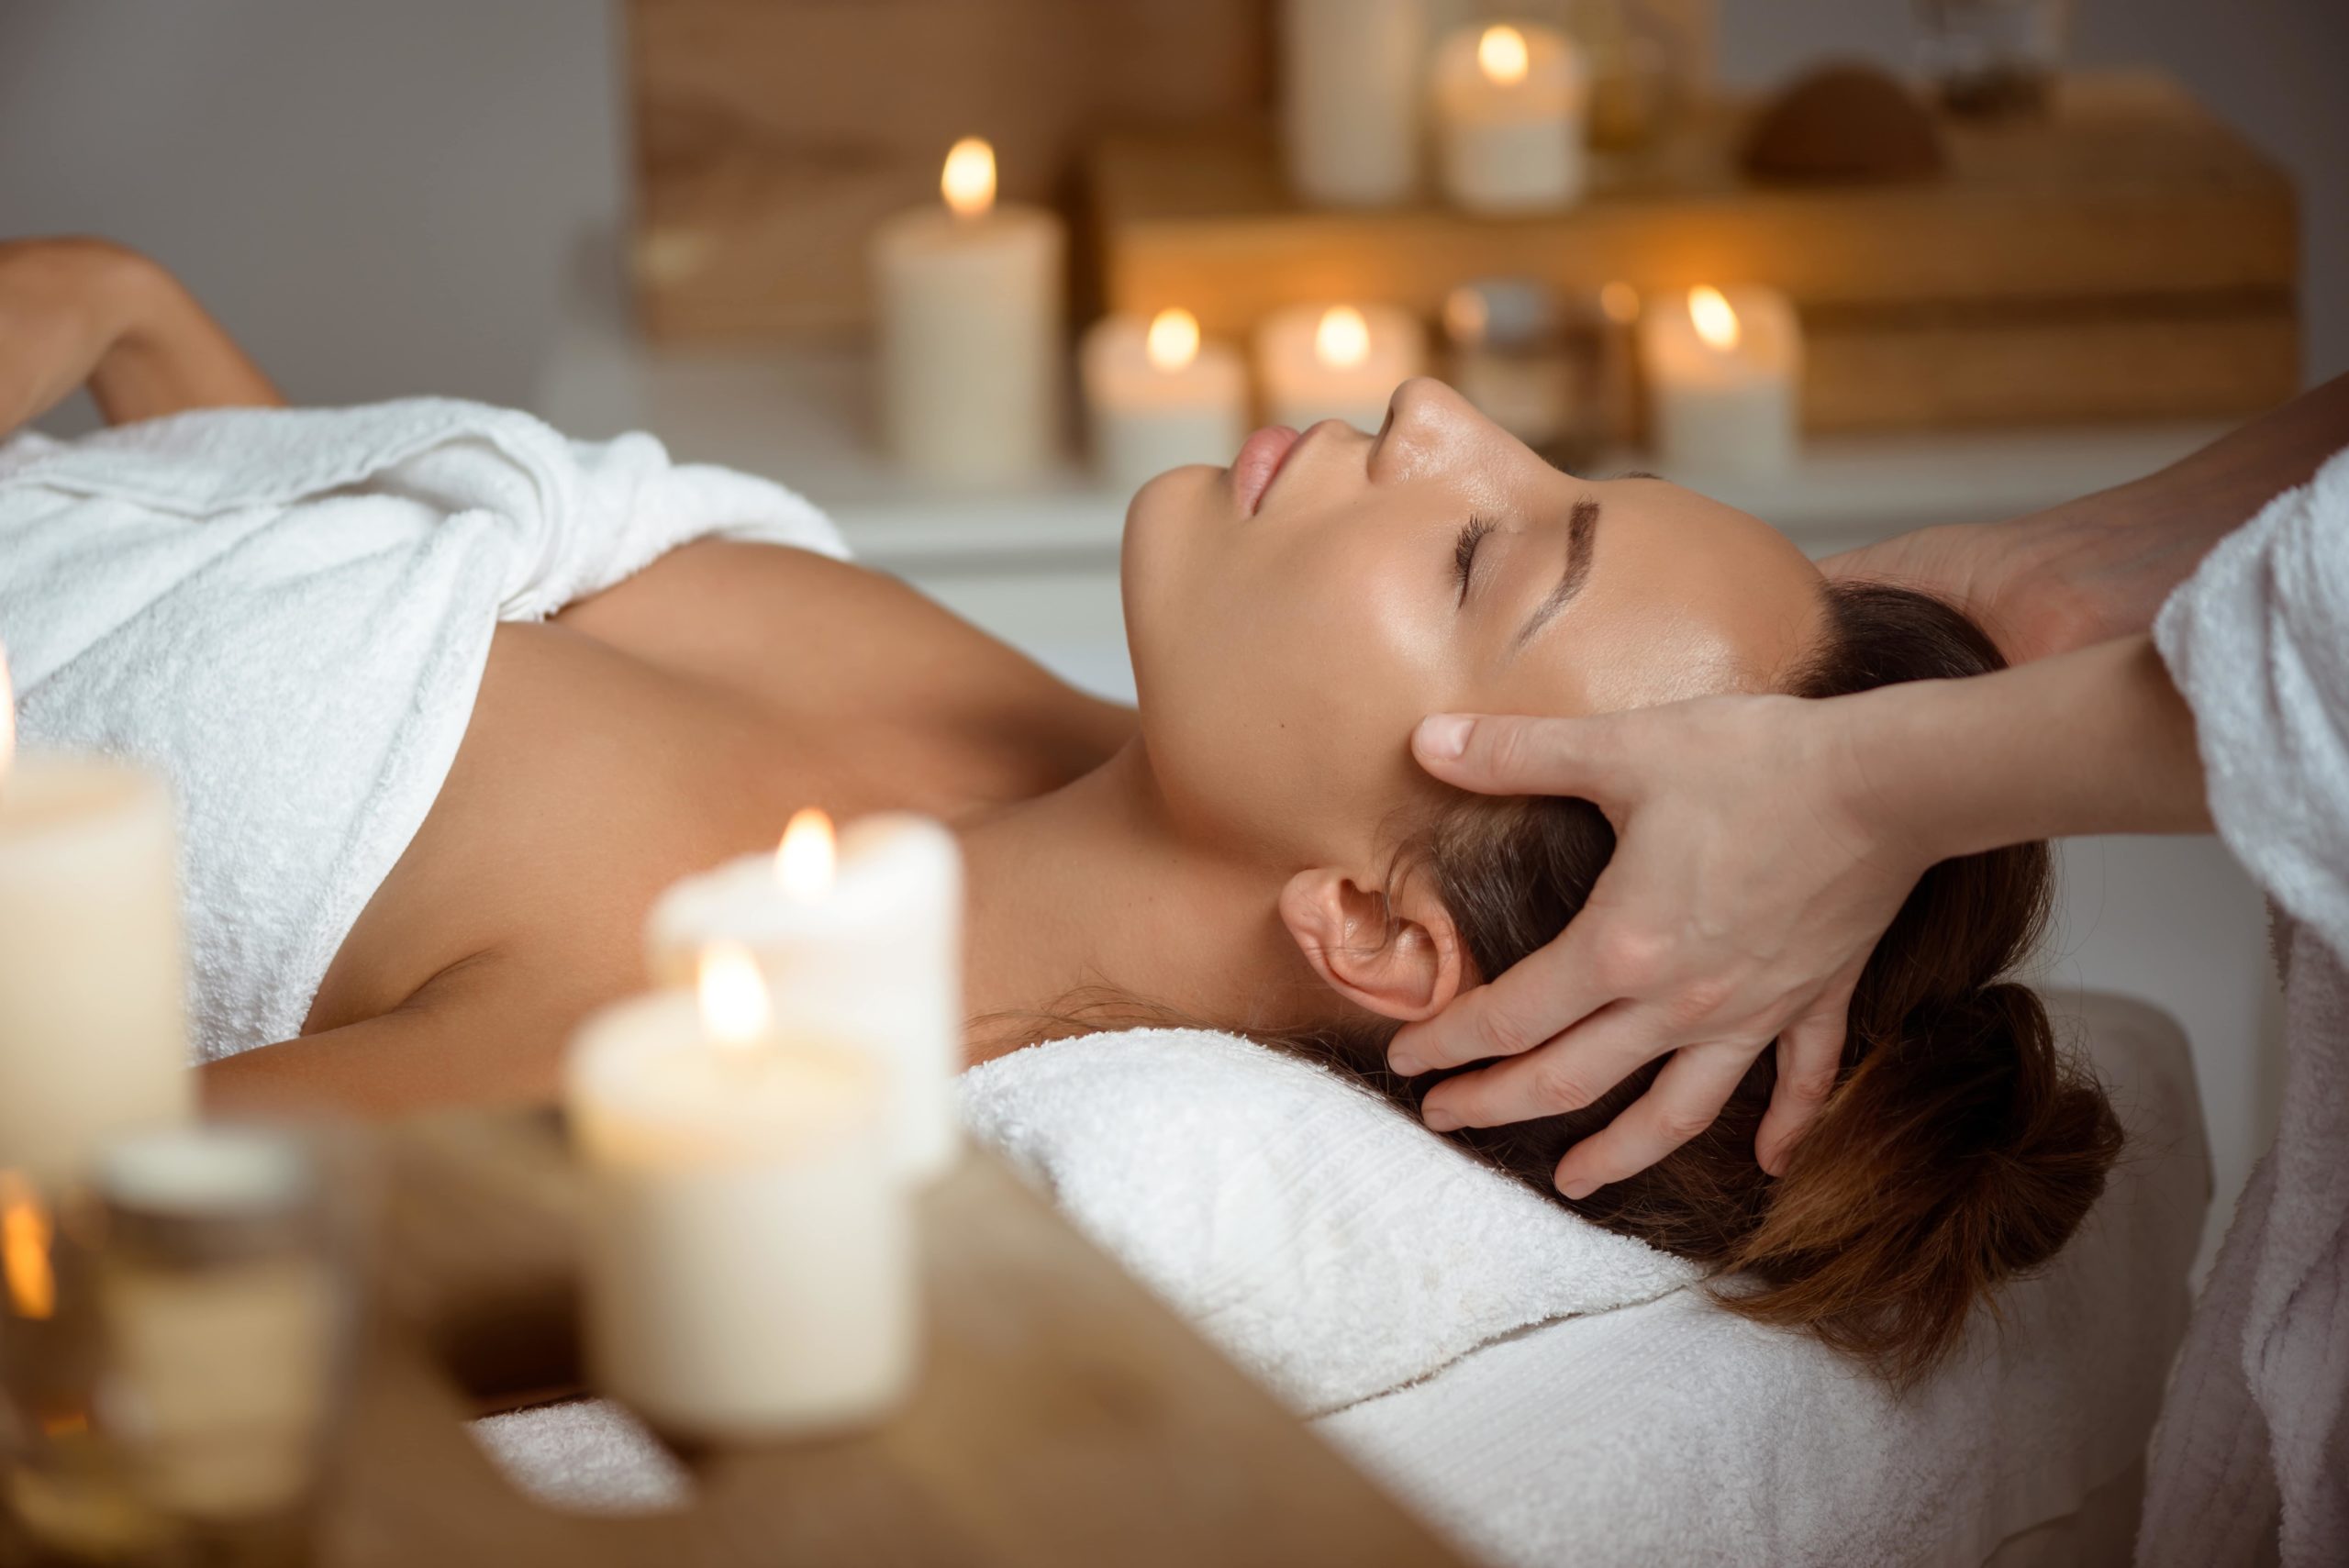 Massage Therapy: More Than Just Relaxation